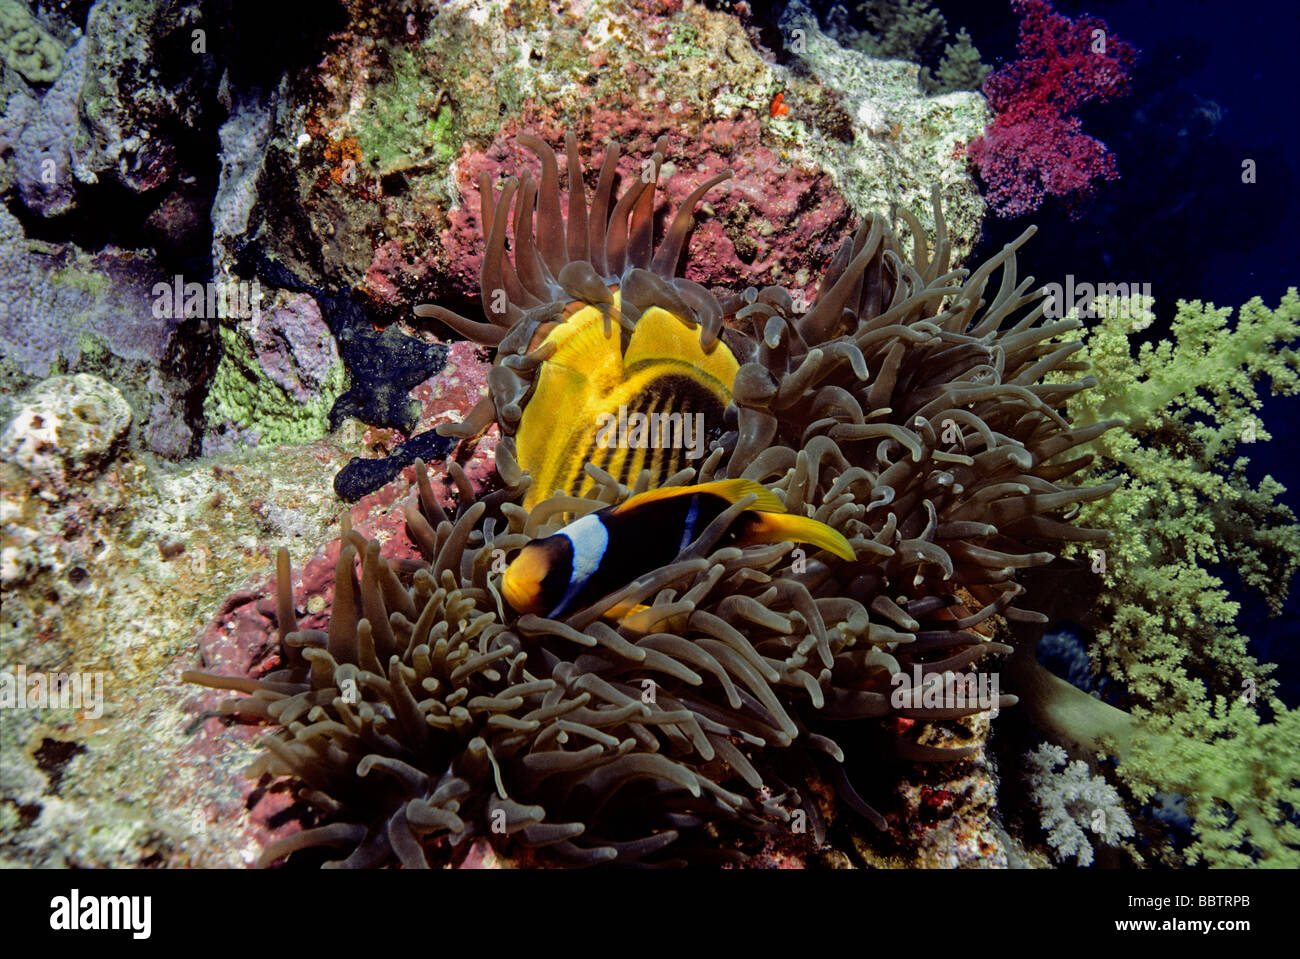 Magnificent Sea Anemone eating Striped Butterflyfish as Clownfish rest in tentacles Stock Photo